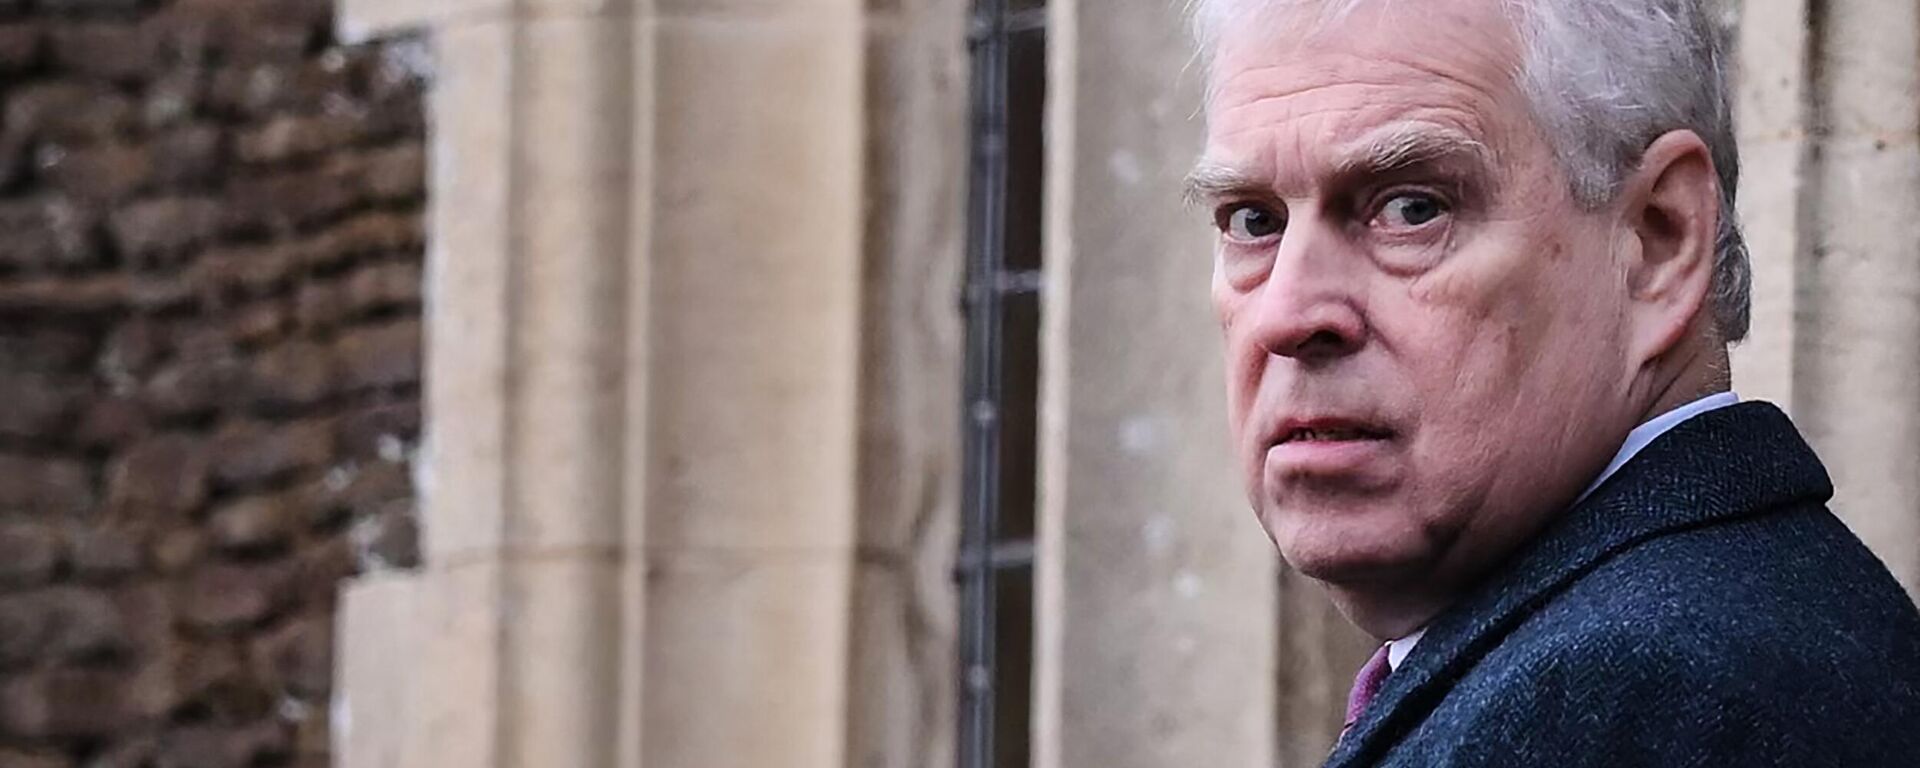 Britain's Prince Andrew, Duke of York reacts as he arrives for the Royal Family's traditional Christmas Day service at St Mary Magdalene Church in Sandringham, Norfolk, eastern England, on December 25, 2022 - Sputnik International, 1920, 19.02.2023